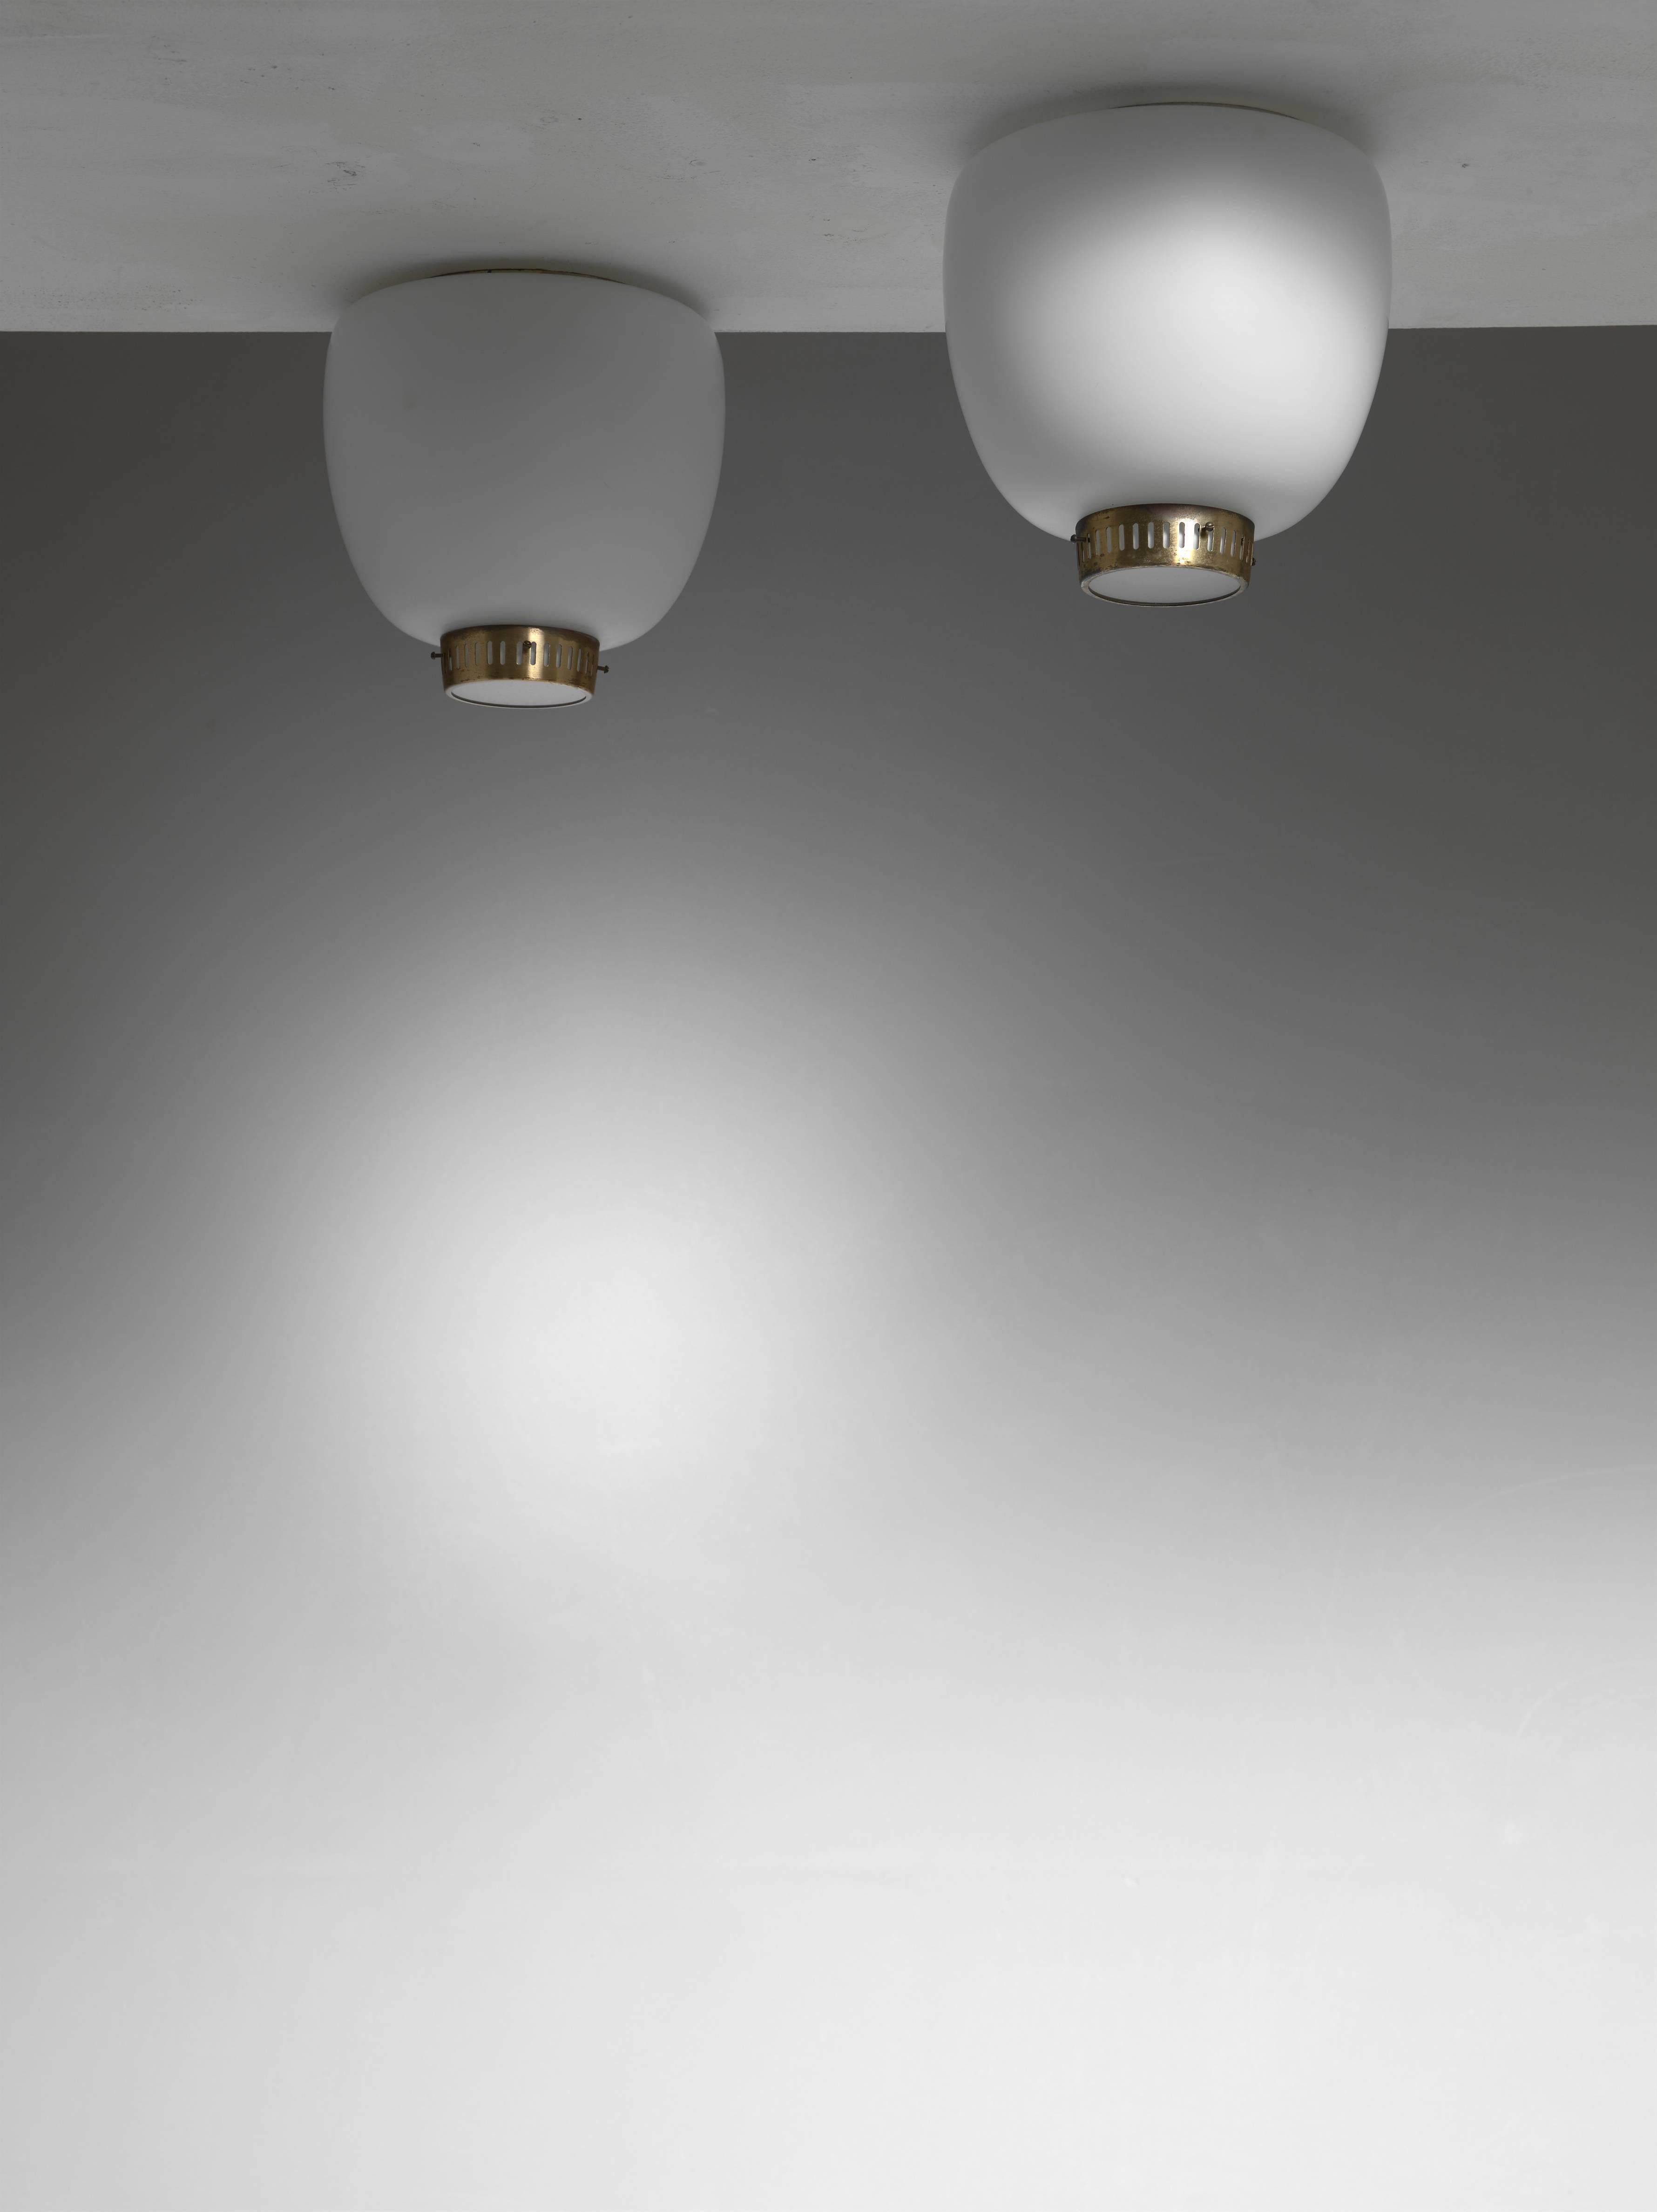 A pair of model 'Kina' opaline glass and brass flush mount ceiling lamps by Bent Karlby for Lyfa.

The lamps are made of an opaline glass shade and a brass ring underneath with a frosted glass diffuser.

